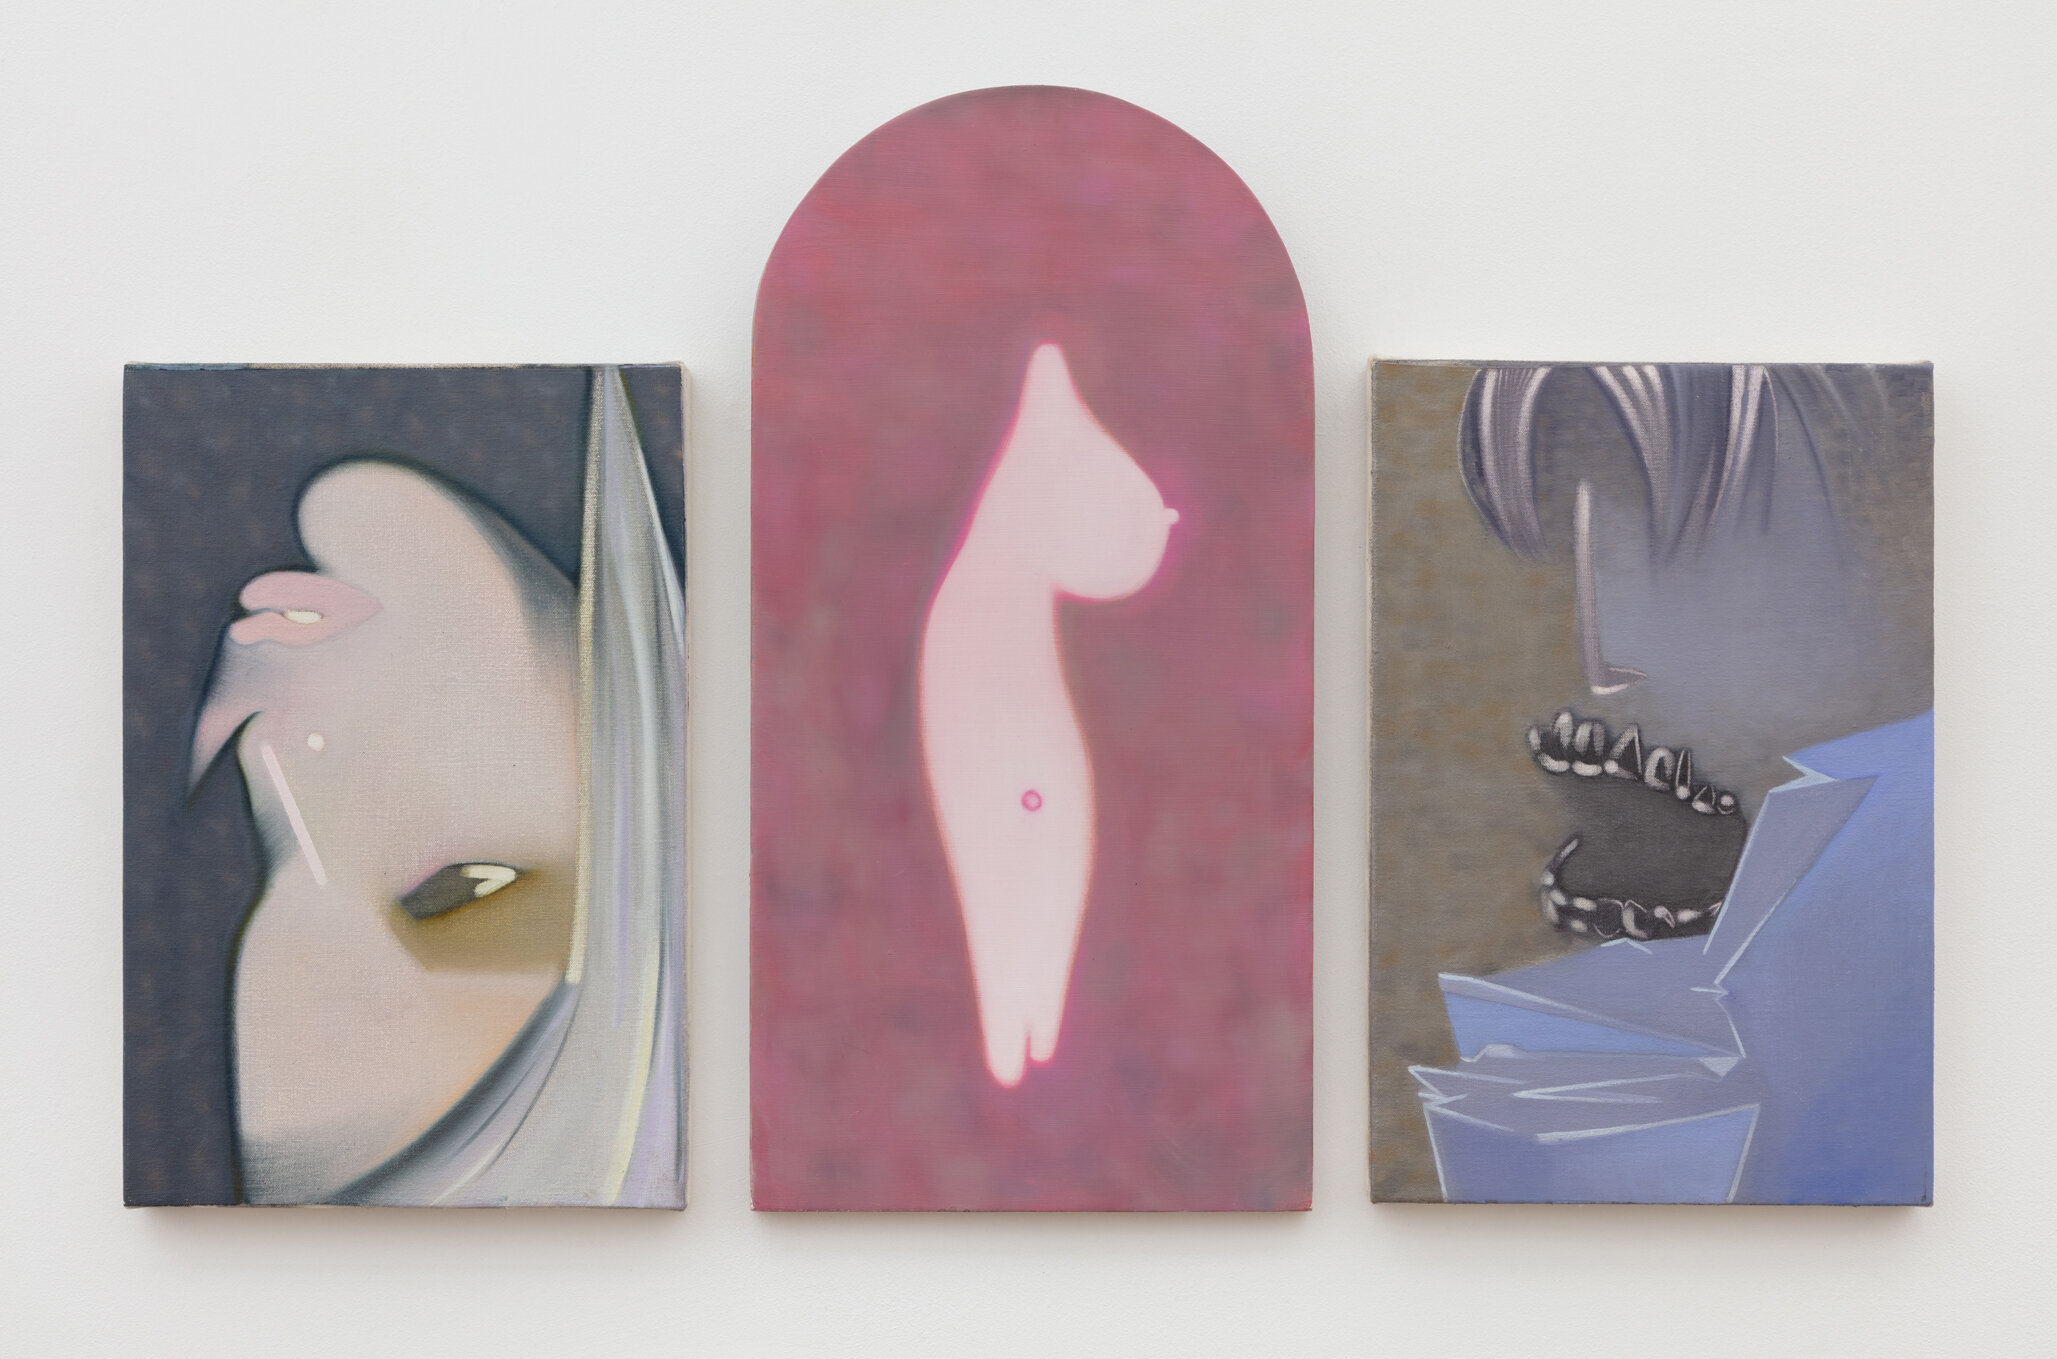   American Princess,  2019. Oil on canvas and cut birch. Three panels: 16 x 12 inches; 24 x 12 inches; 16 x 12 inches. 